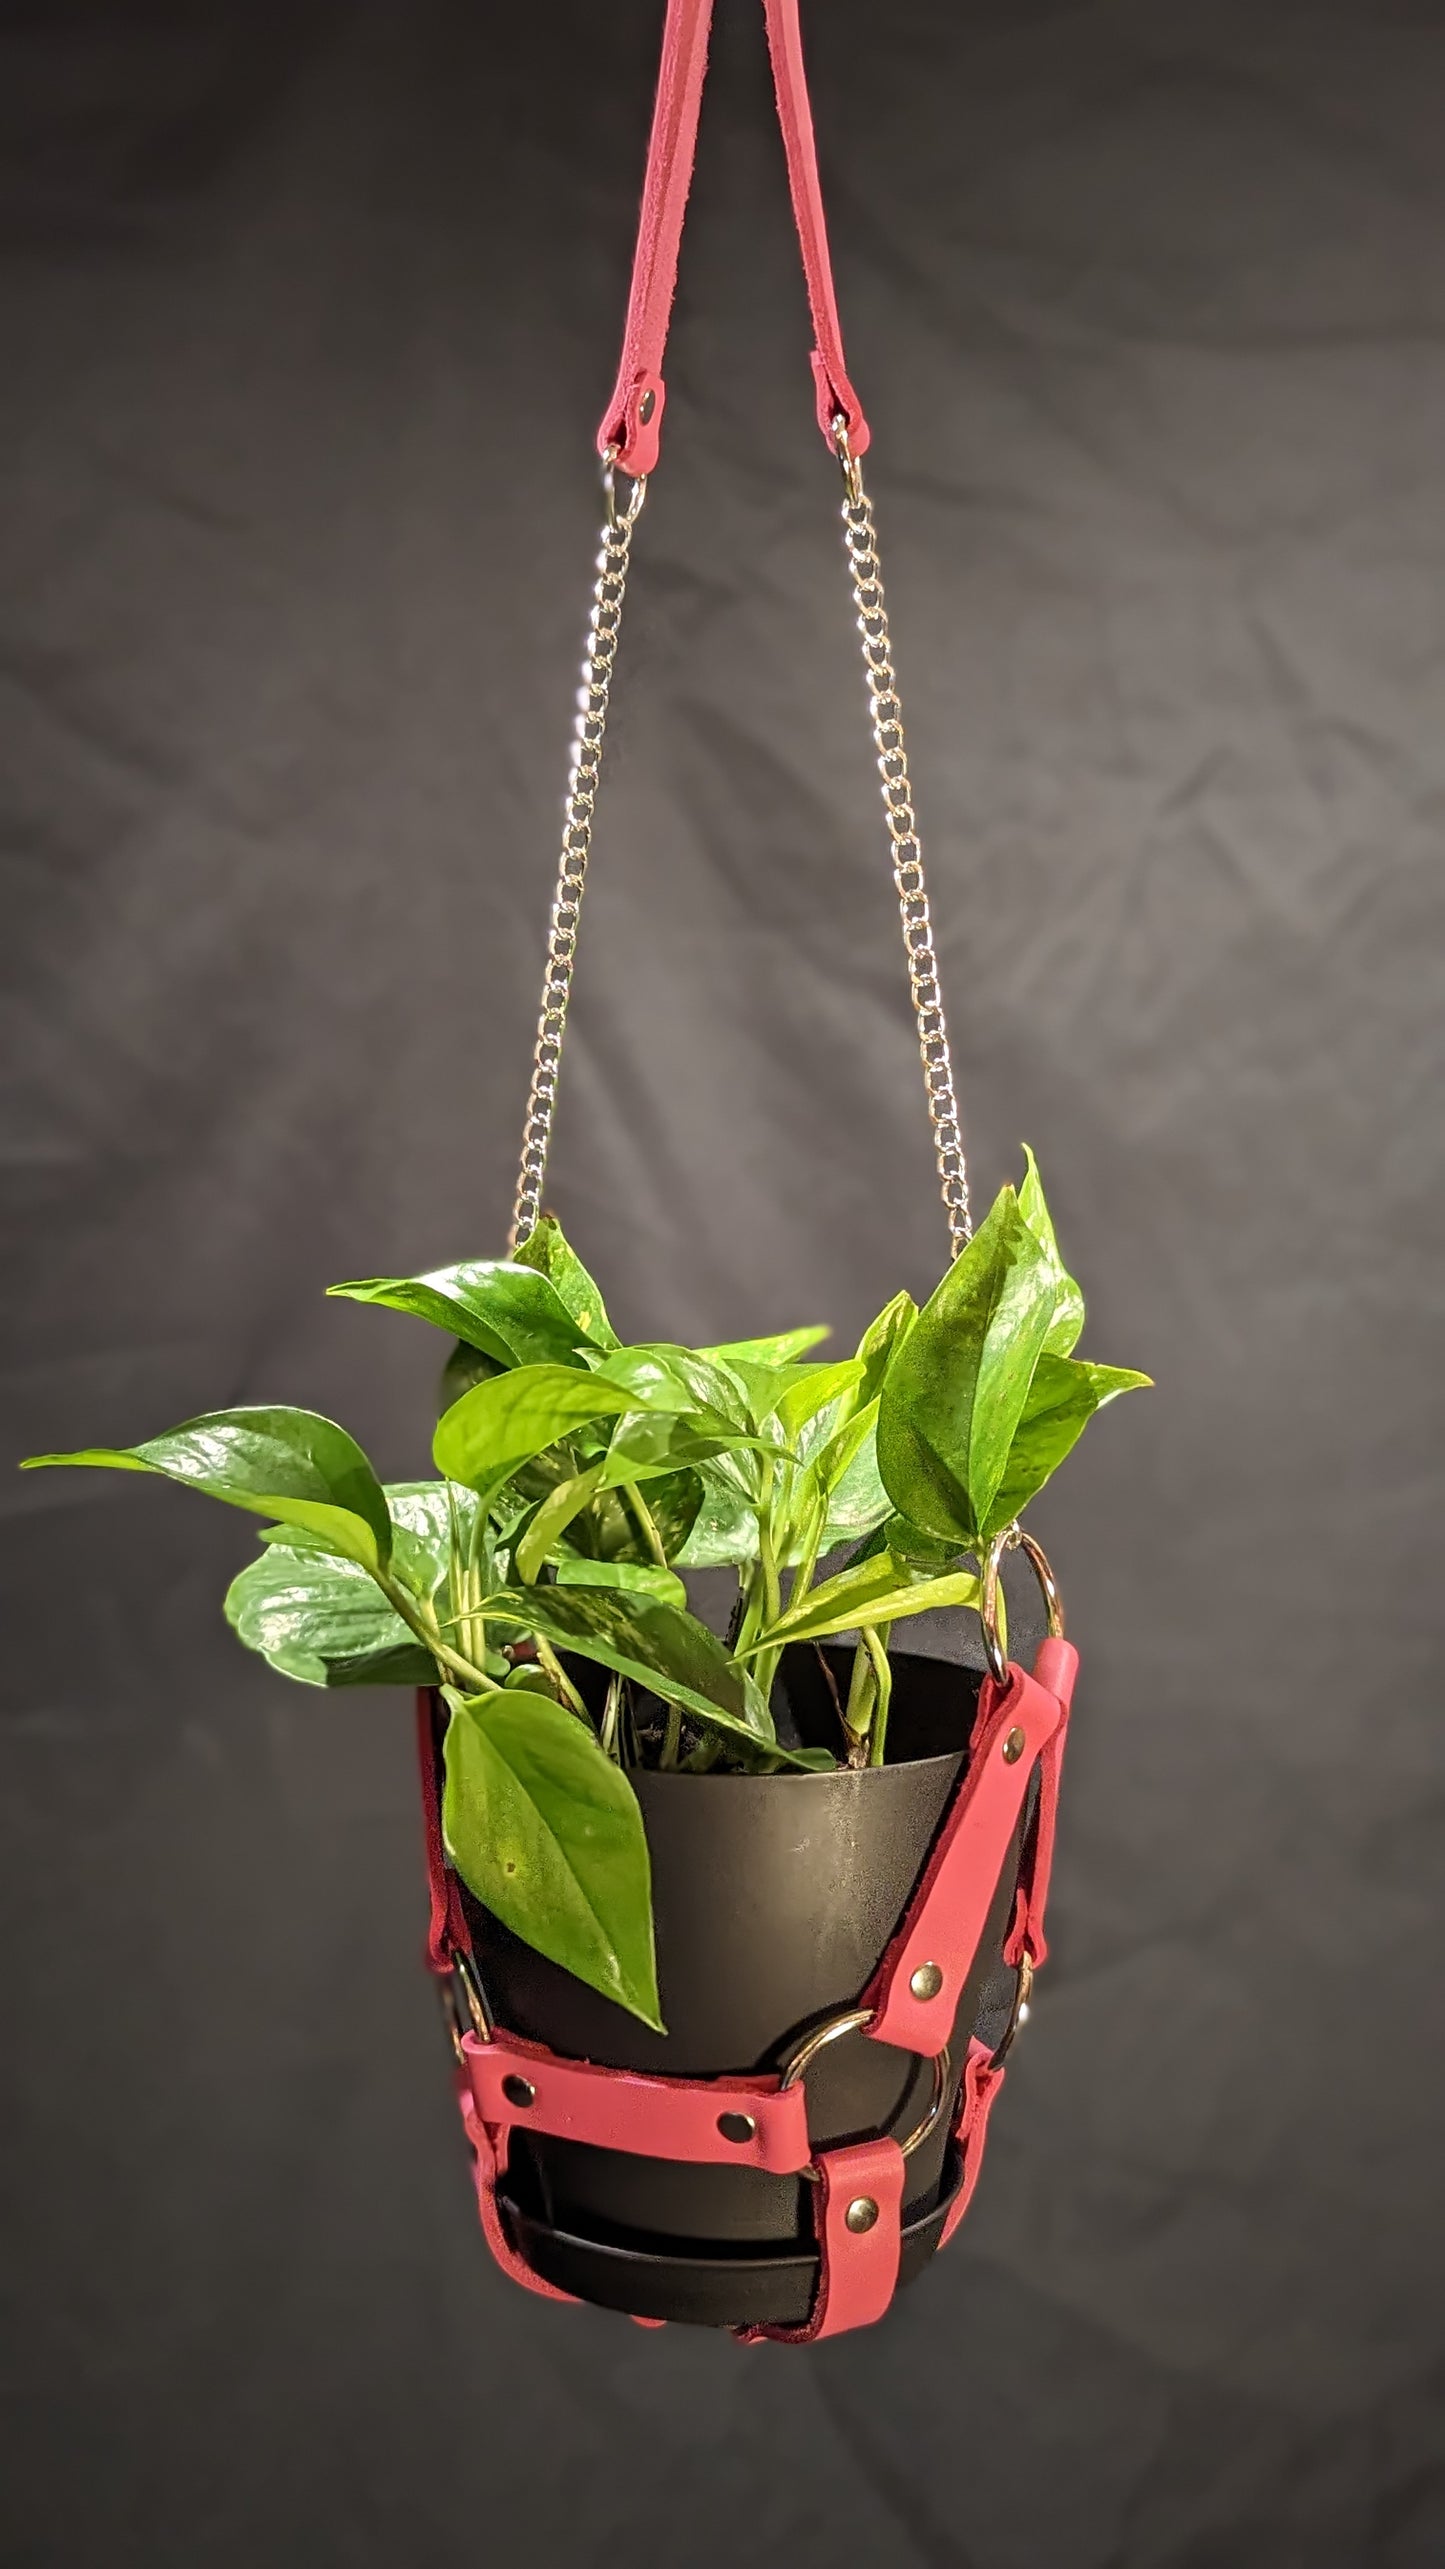 Pink leather plant hanger with silver hardware and chain. It is holding a 6" black plant pot with a golden pothos plant.